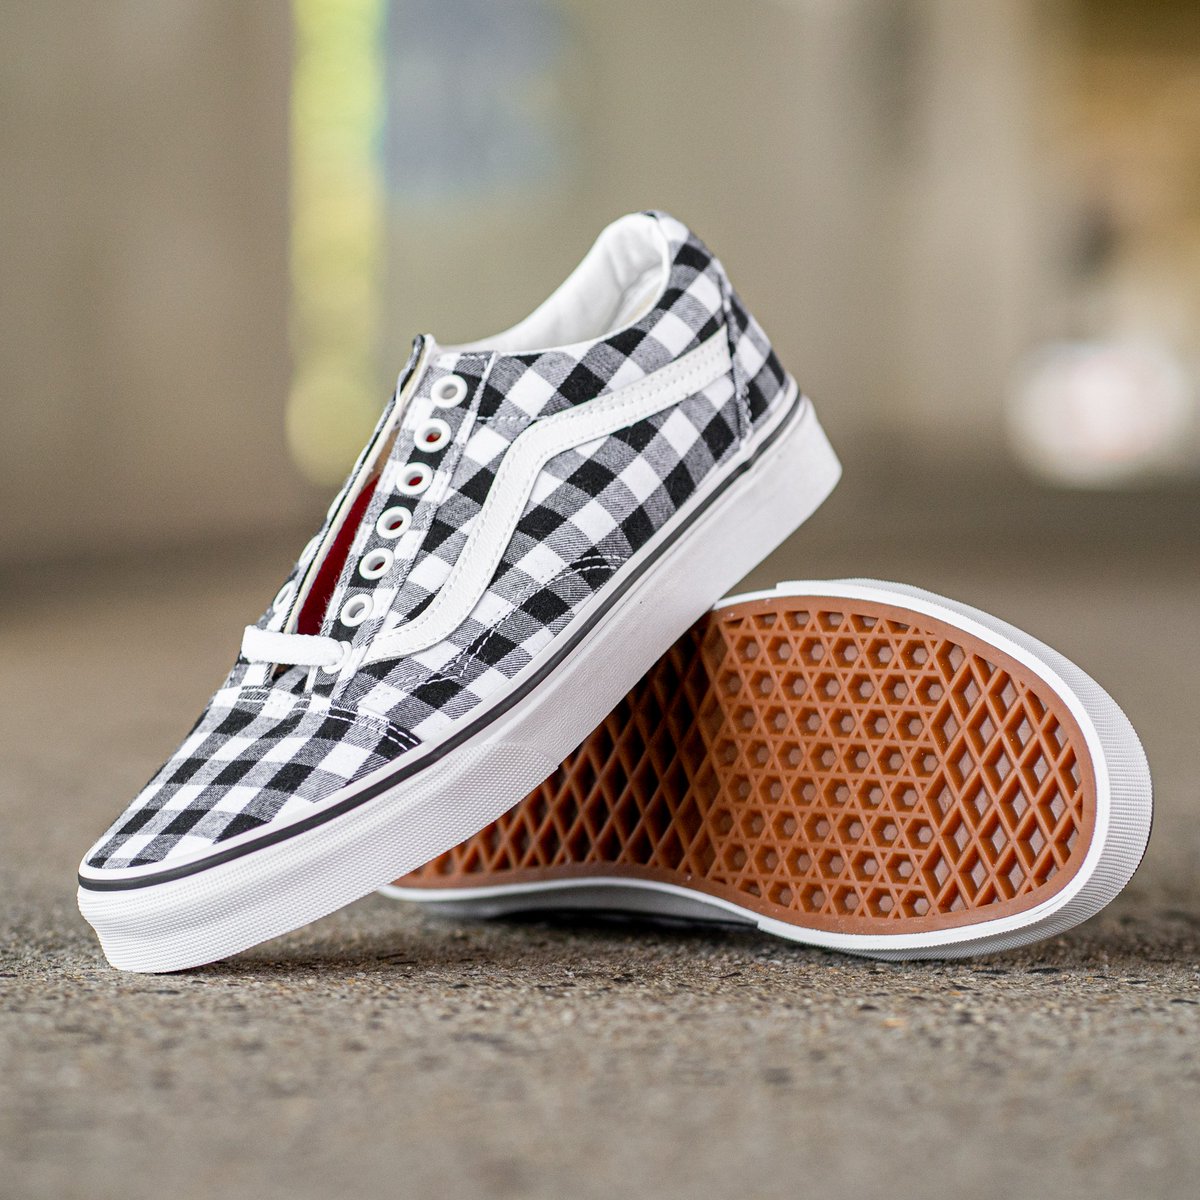 vans customer support email